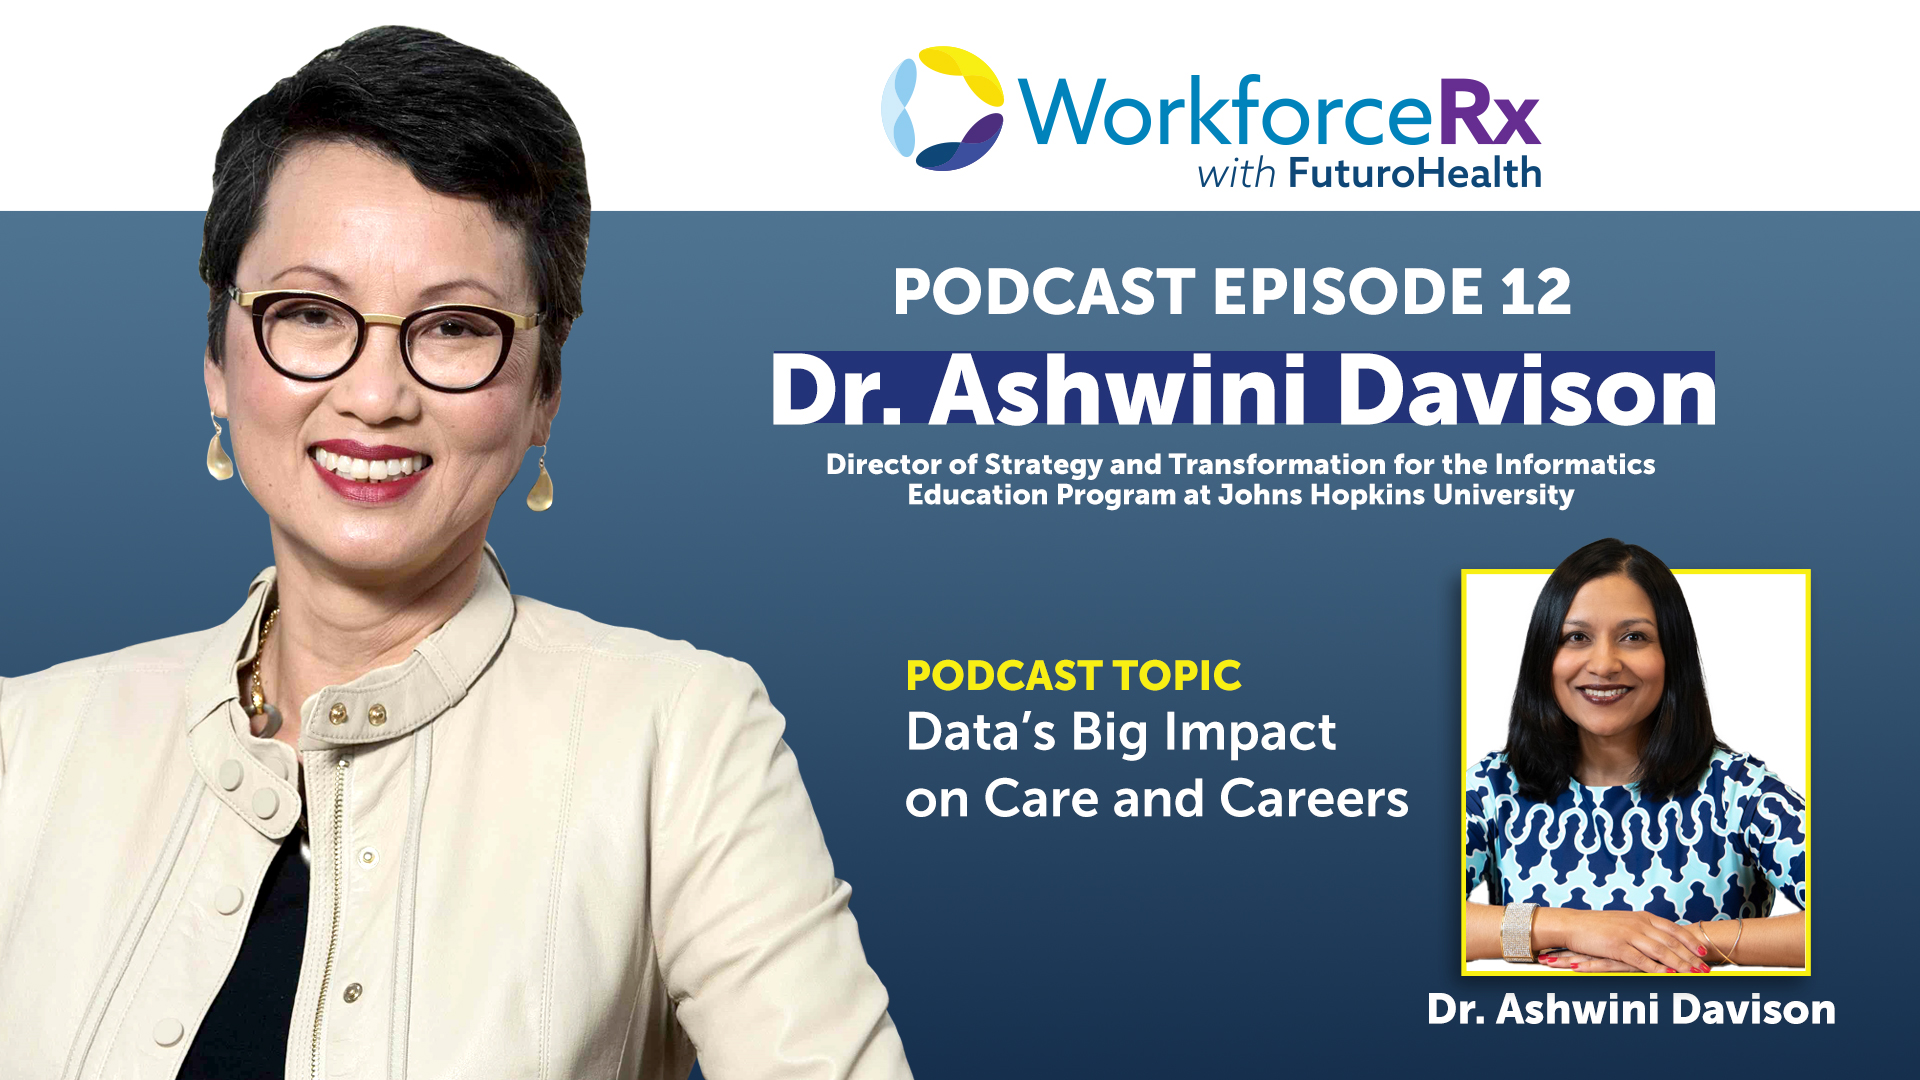 Dr. Ashwini Davison, Director of Strategy and Transformation for the Informatics Education Program at Johns Hopkins University – Data’s Big Impact on Care and Careers